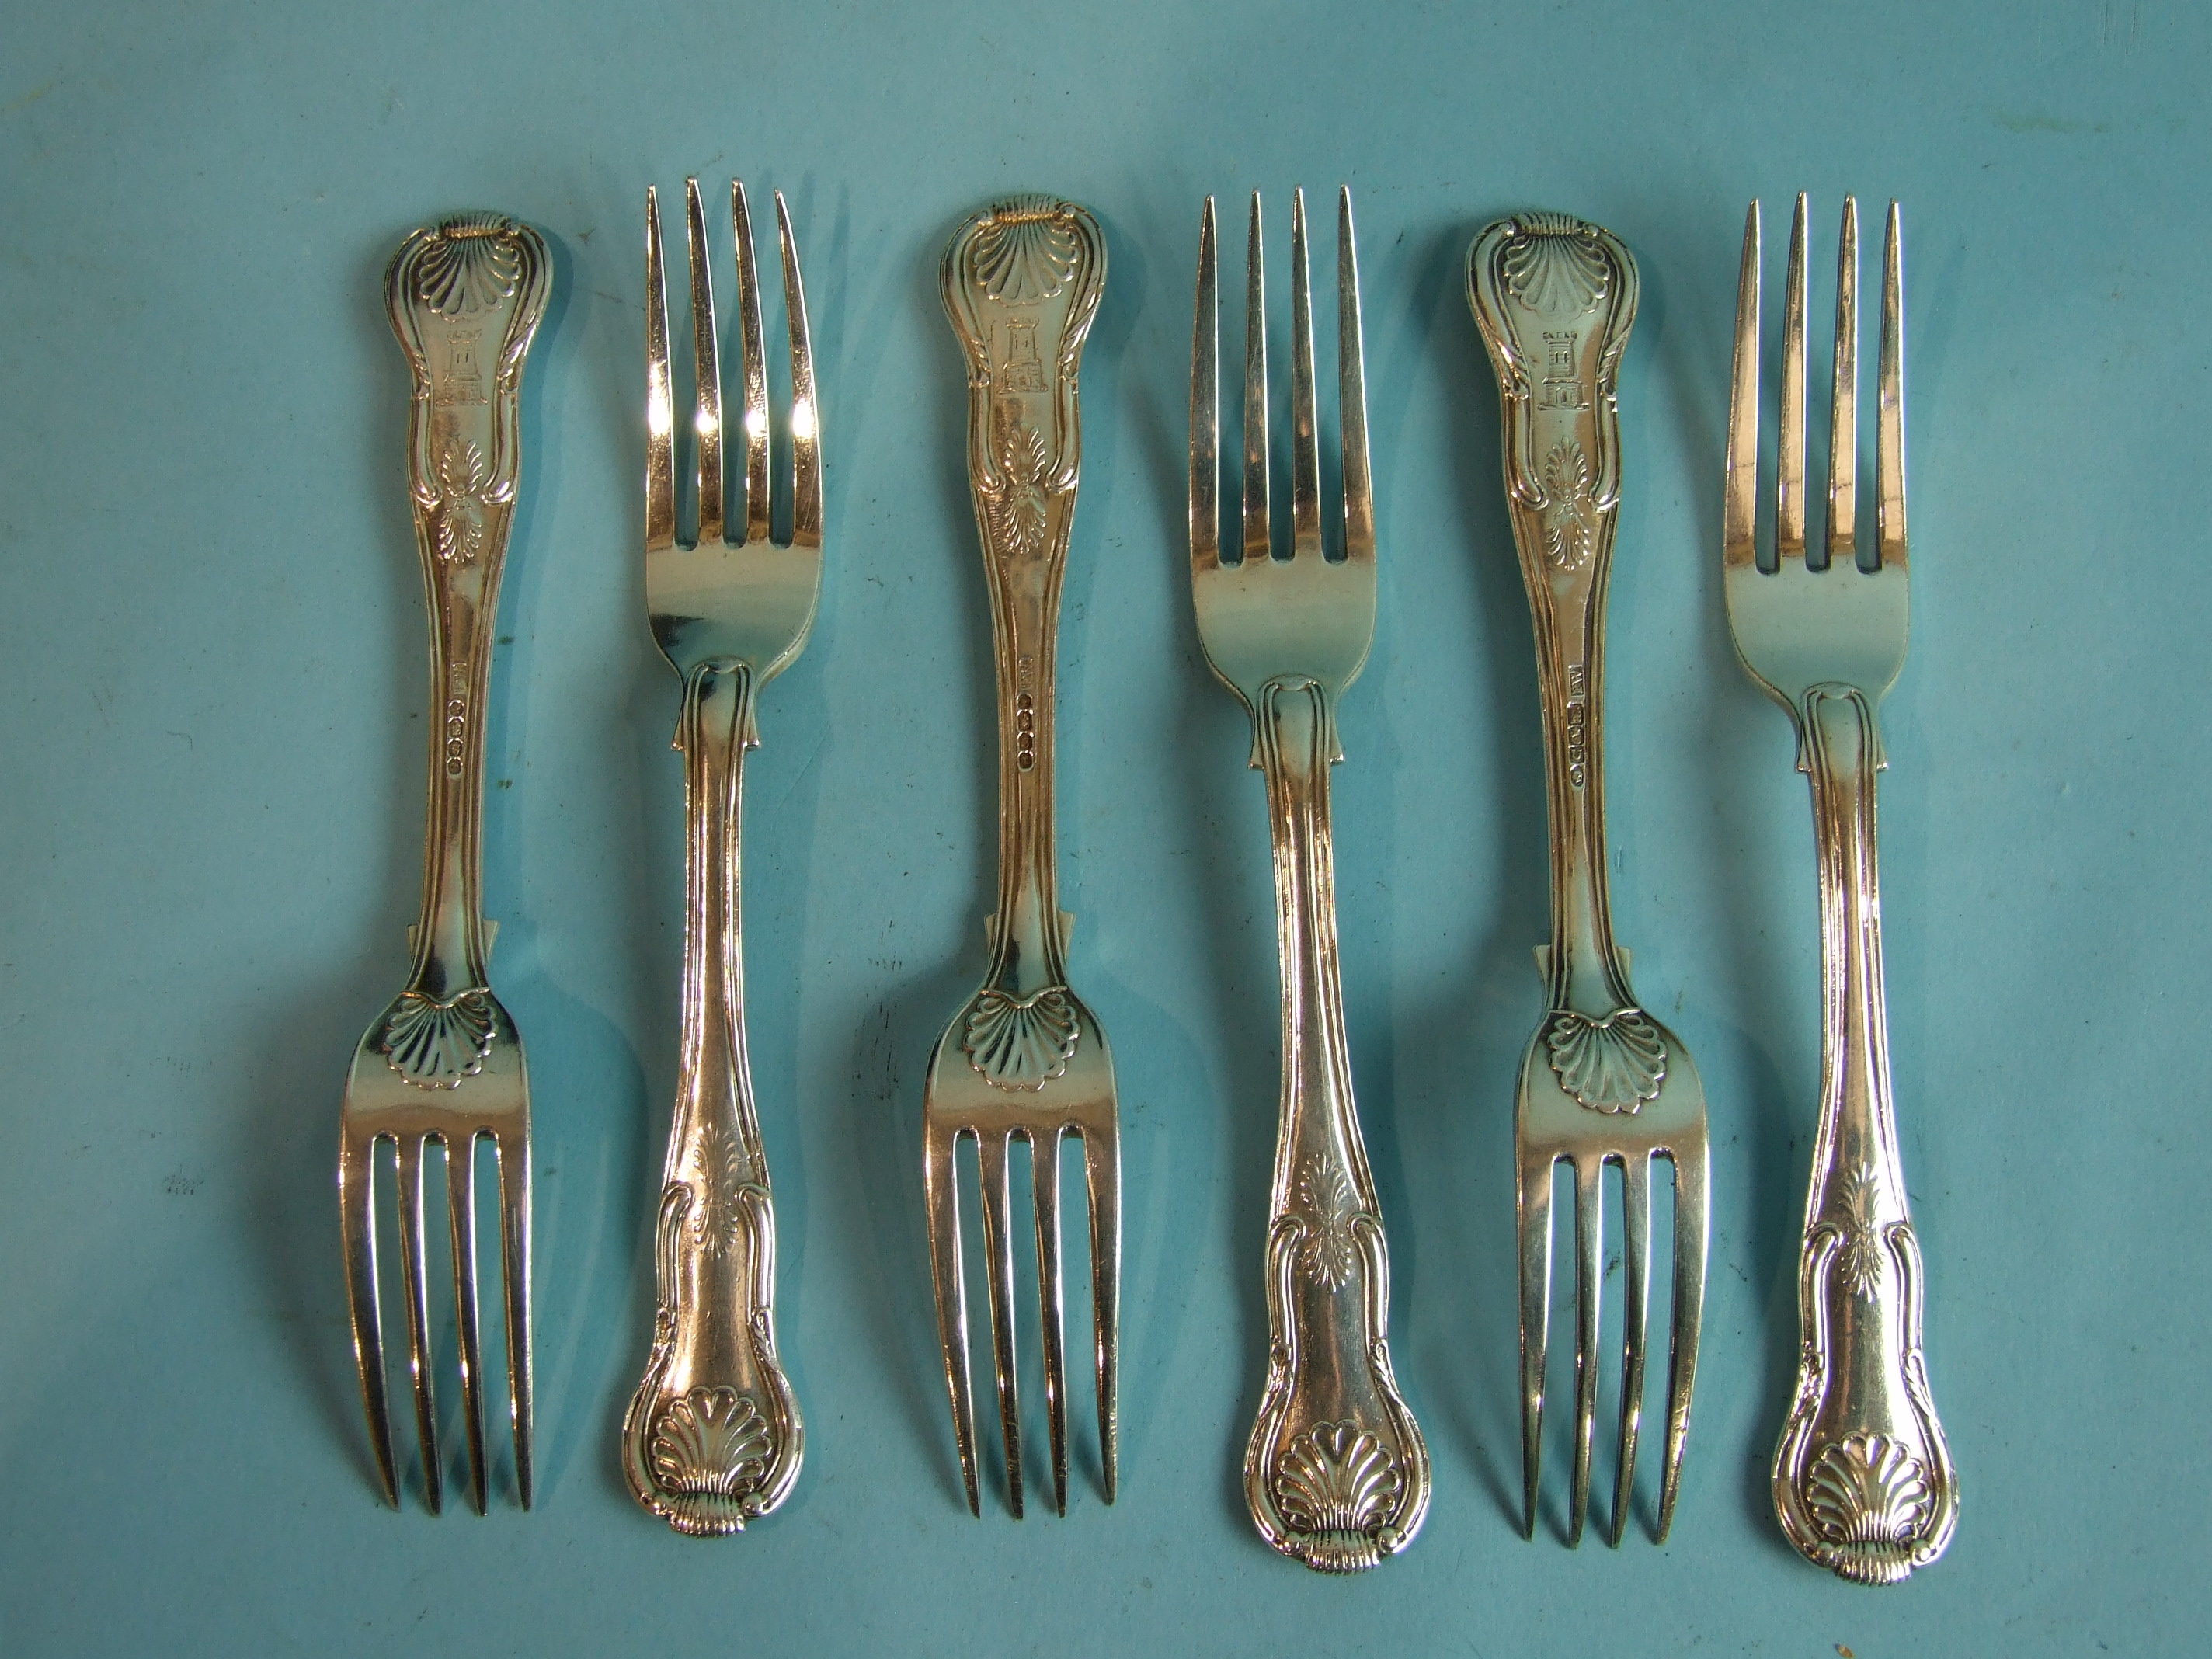 A set of six Irish king's pattern dessert forks, Dublin 1839, maker Philip Weekes, with castle - Image 2 of 2